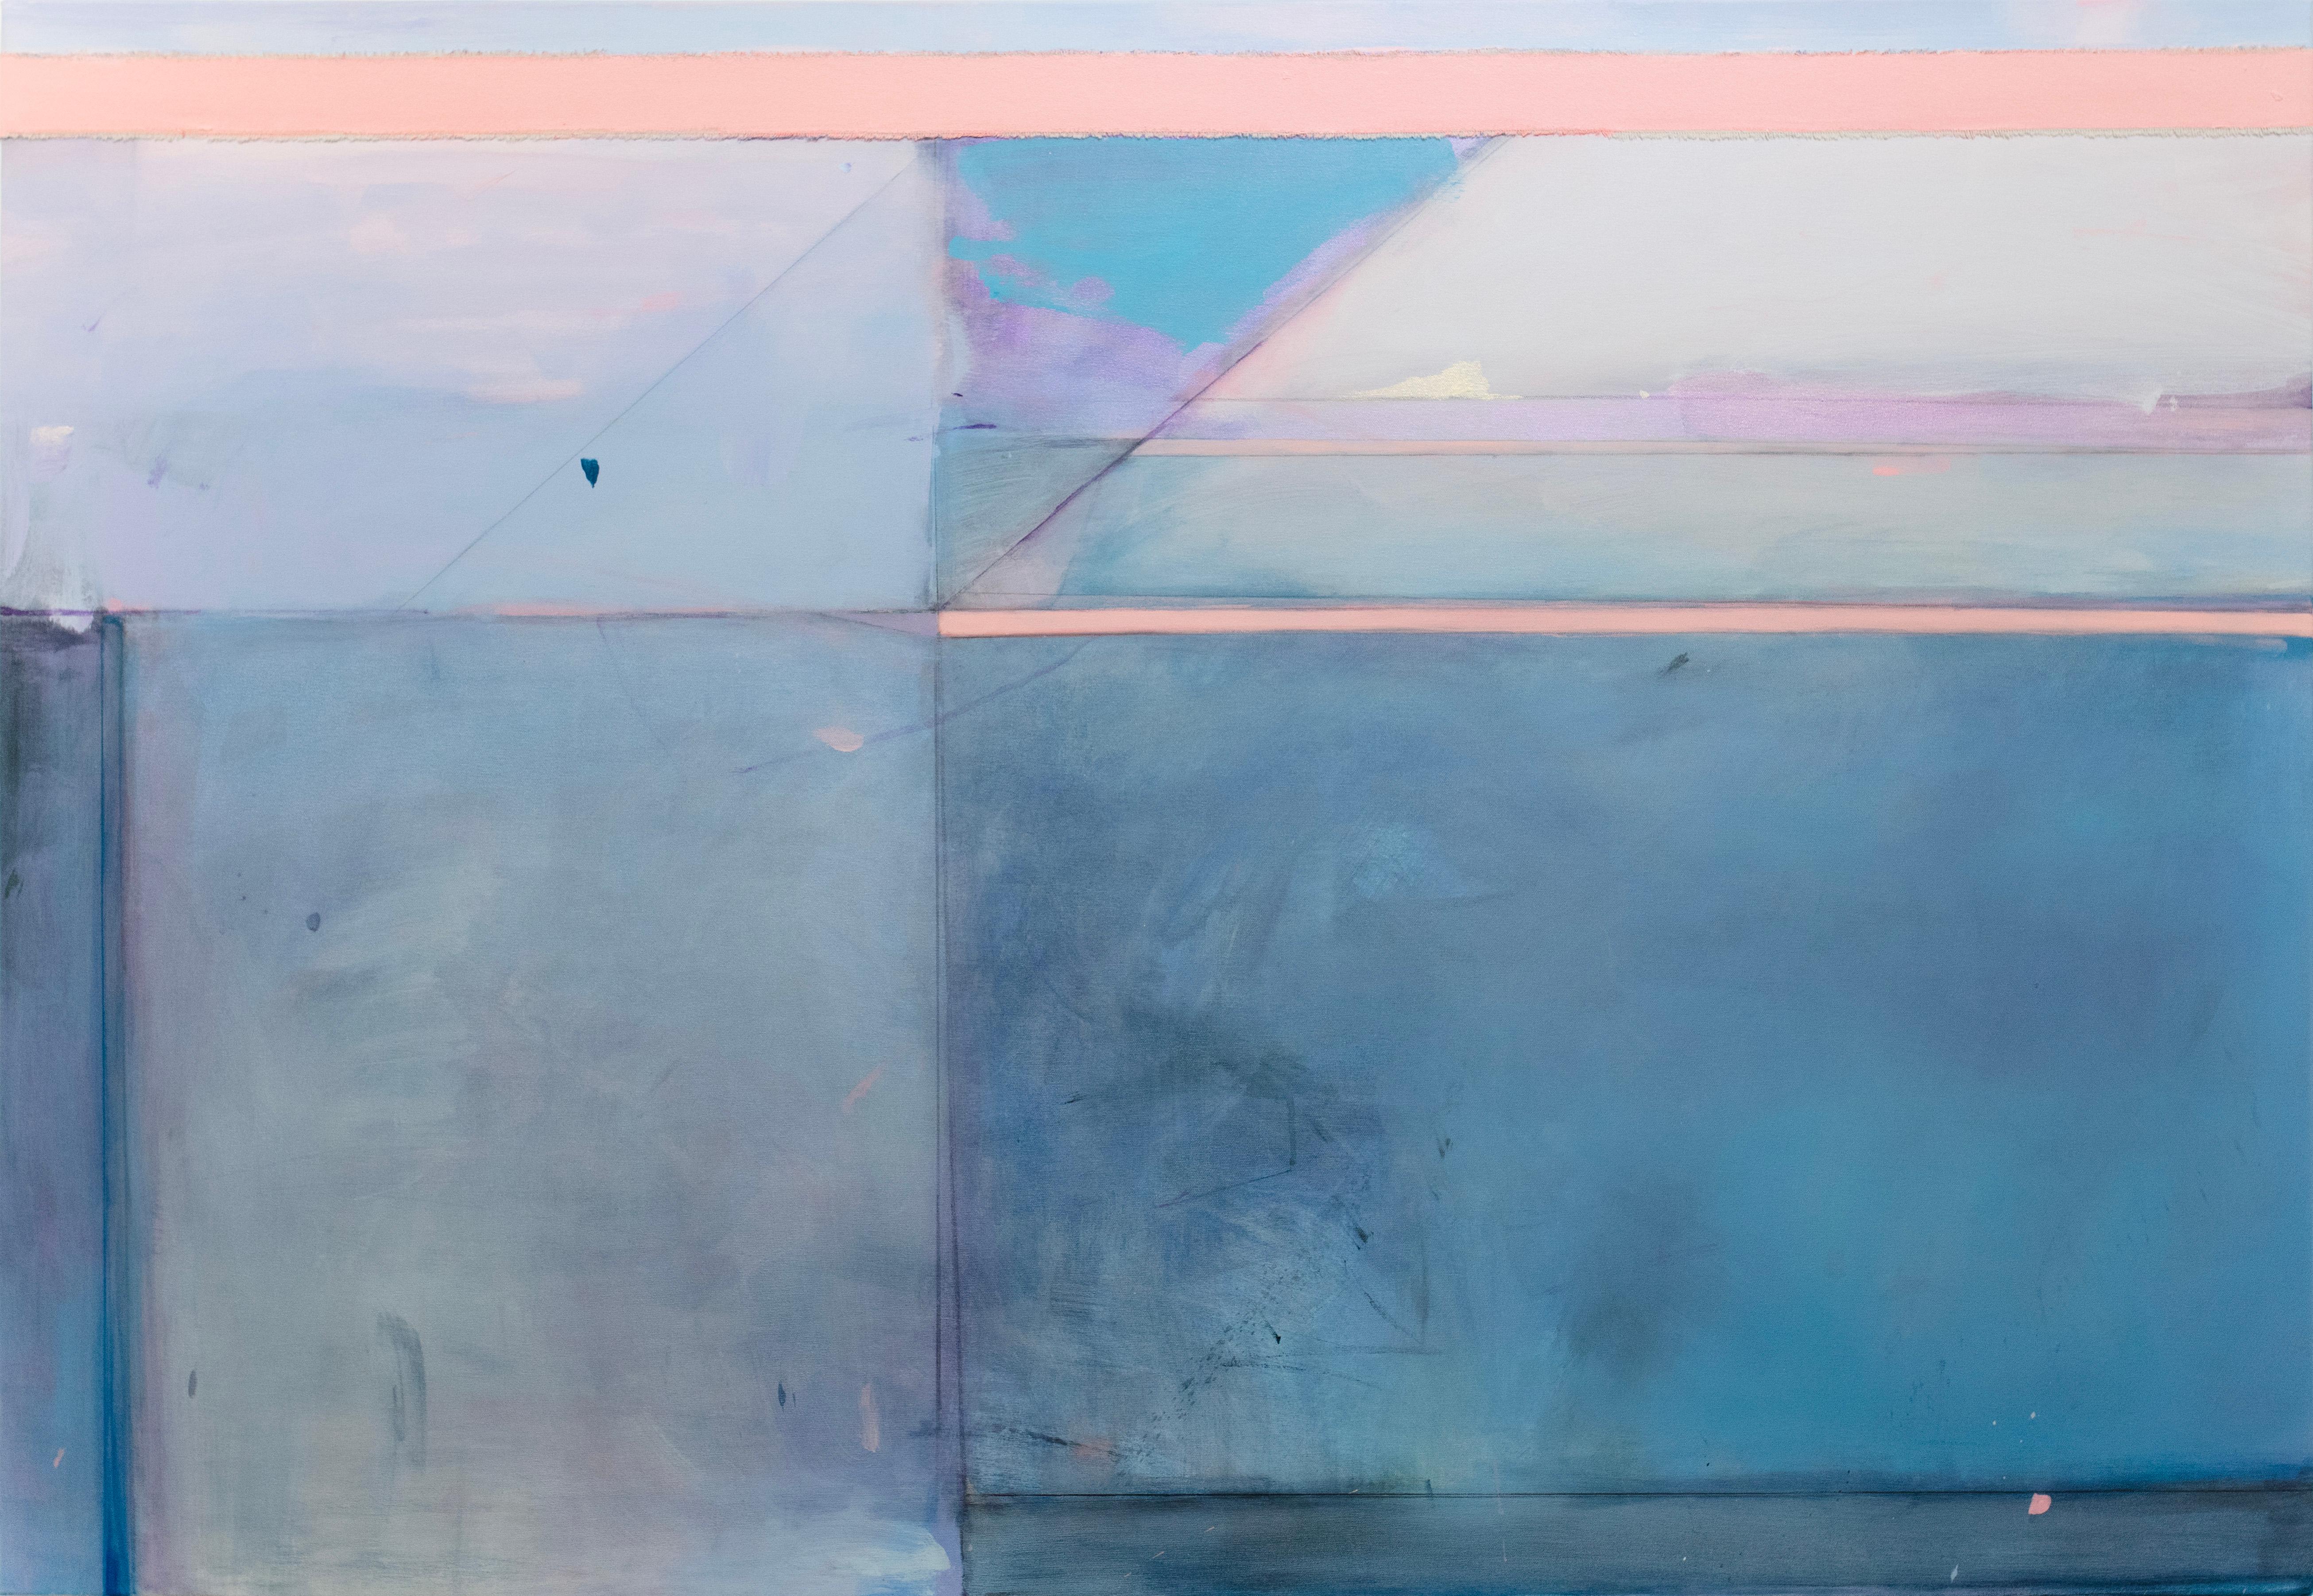 This large abstract painting by Kelly Rossetti is made with acrylic paint and raw canvas pieces assembled on gallery wrapped canvas. It features a light pink and blue palette with geometric horizontal and diagonal lines, shapes, and marks layered